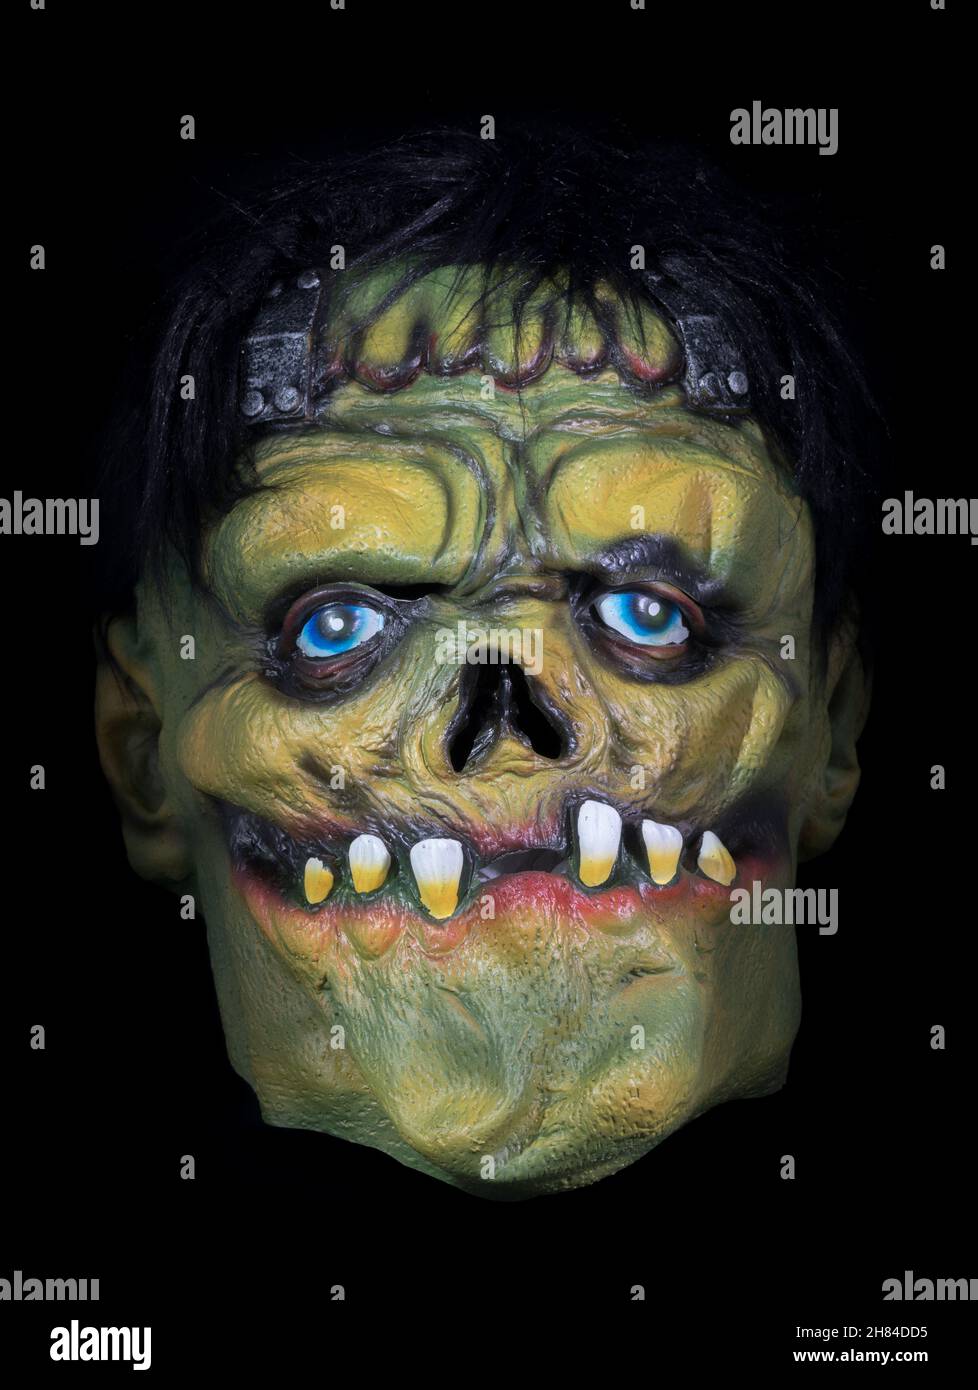 Green Face Monster with Wig Mask Isolated Against Black Background Stock Photo